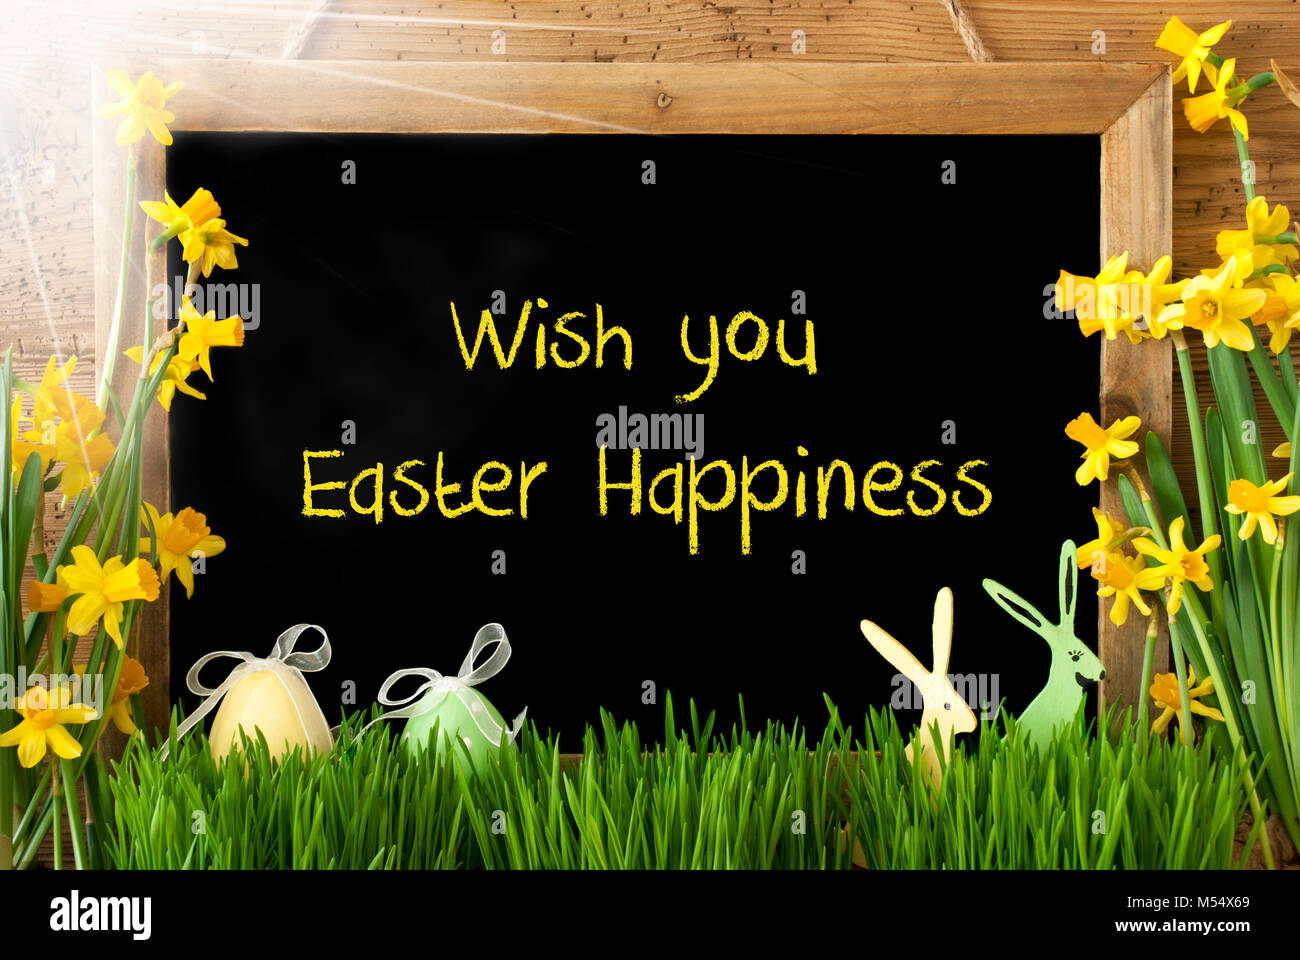 Sunny Narcissus, Egg, Bunny, Text Wish You Easter Happiness Stock Photo